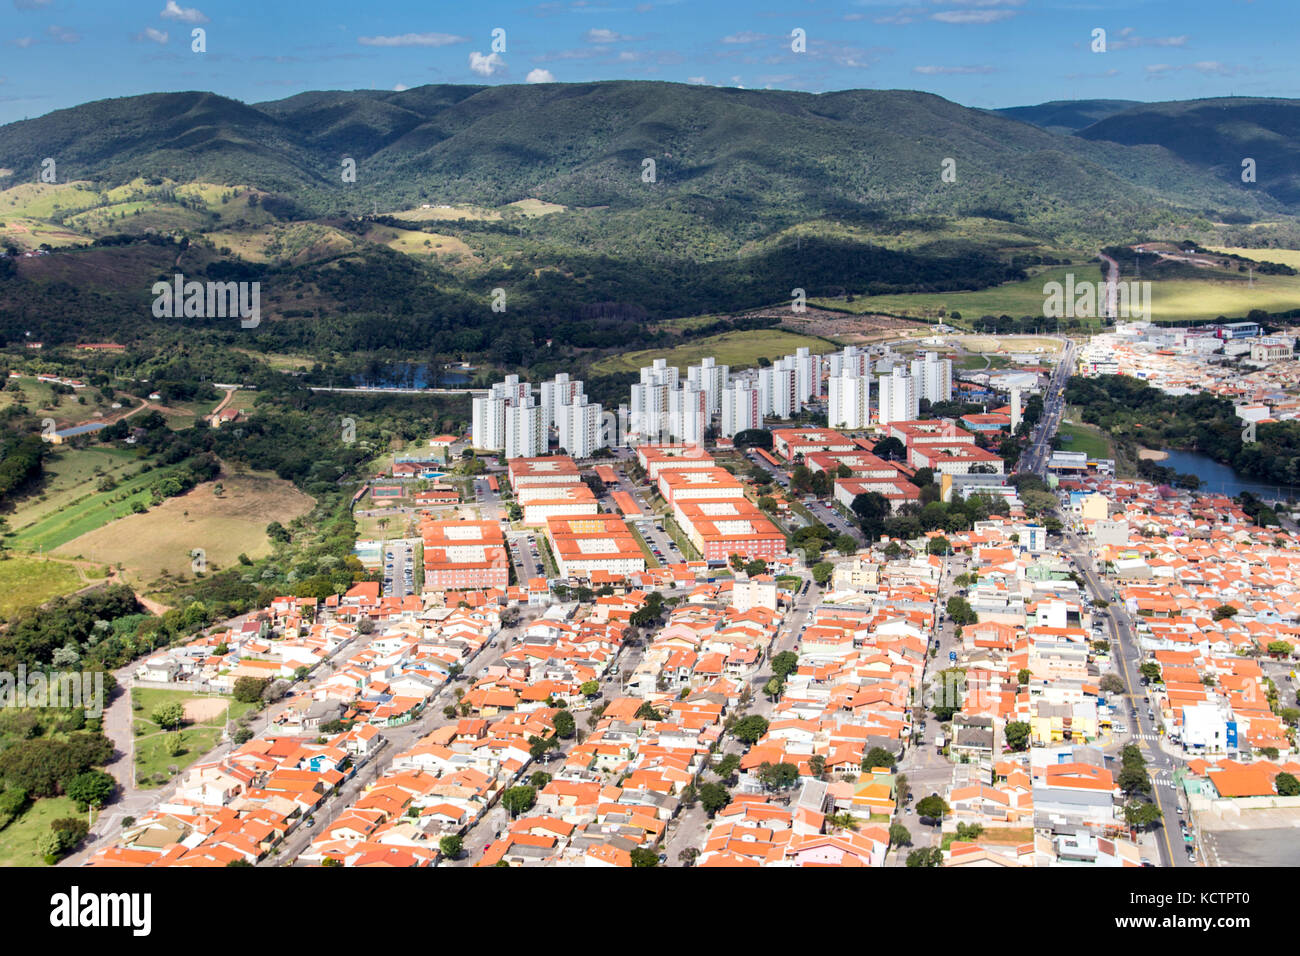 Aerial view of Jundiaí, city near São Paulo - Brazil. Houses and buildings at Eloy Chaves neighborhood. Serra do Japi saw in the background. Stock Photo